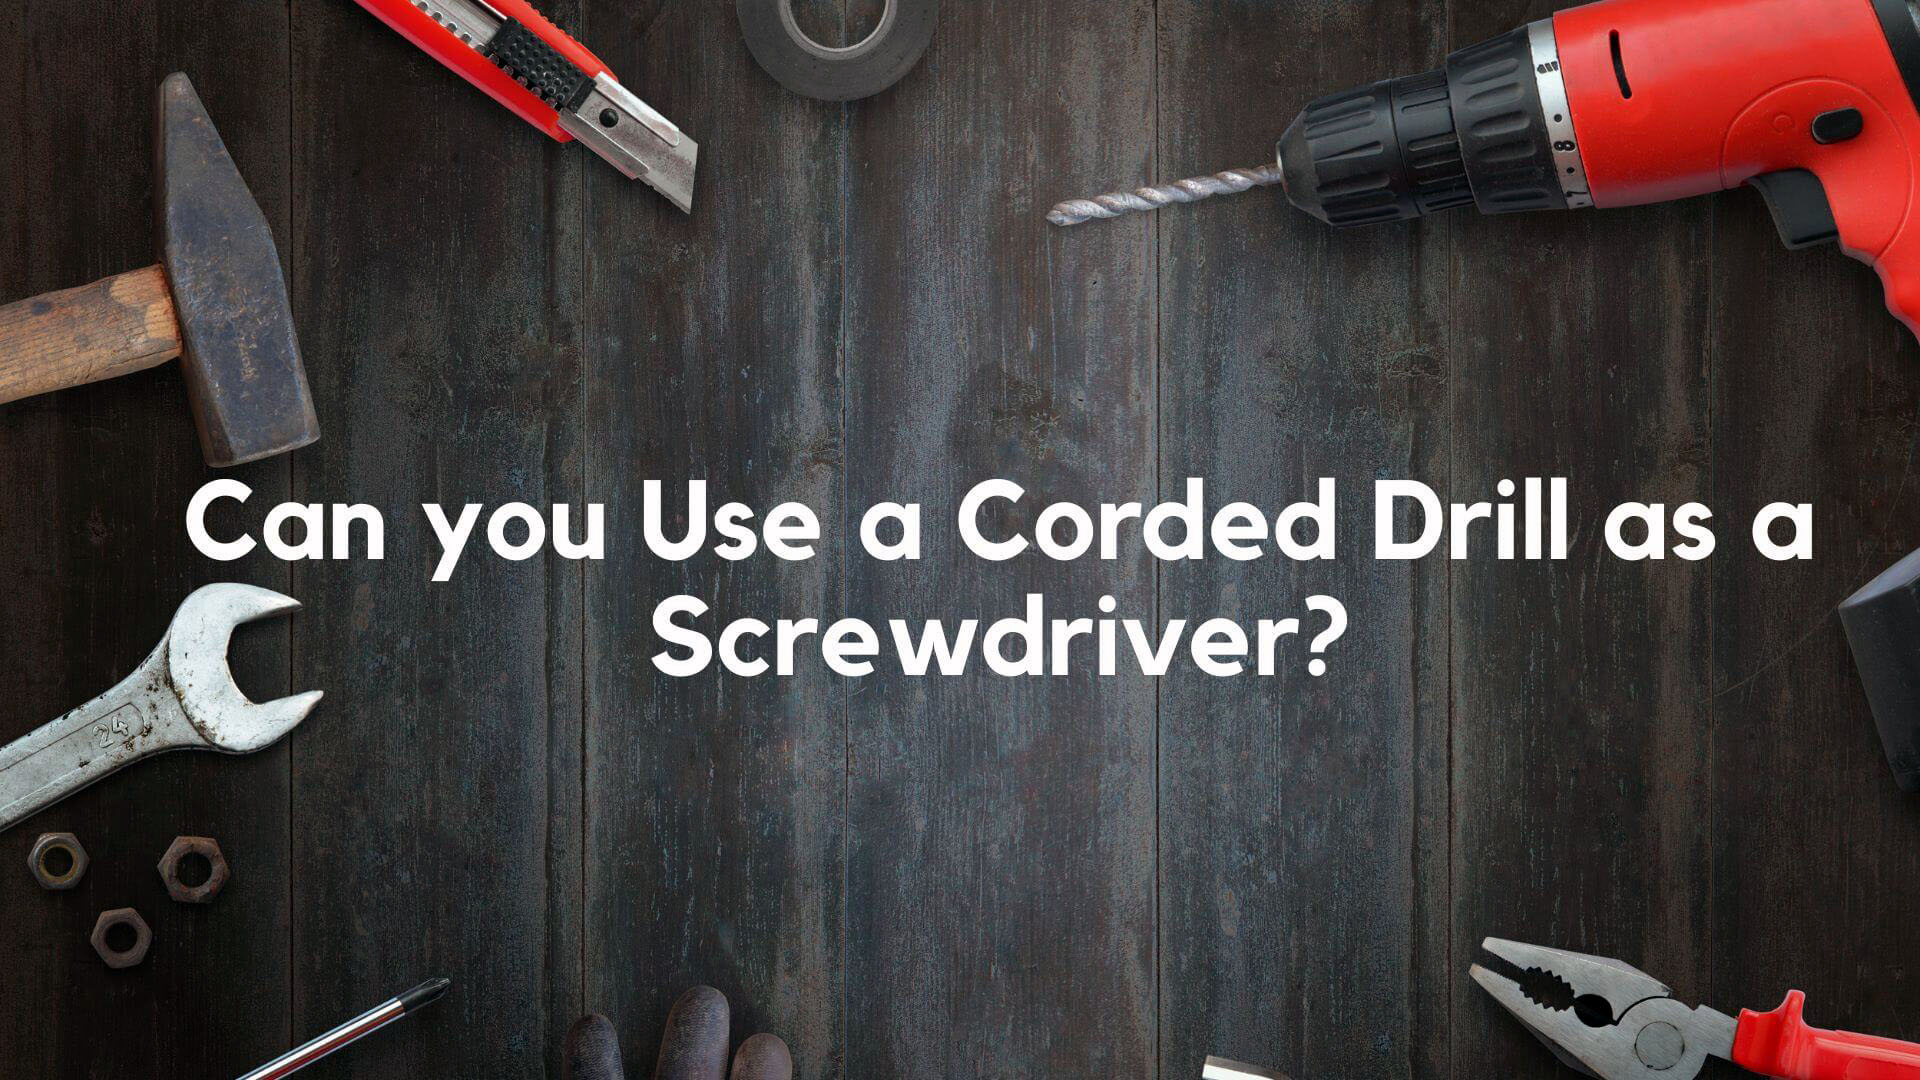 Can you Use a Corded Drill as a Screwdriver?